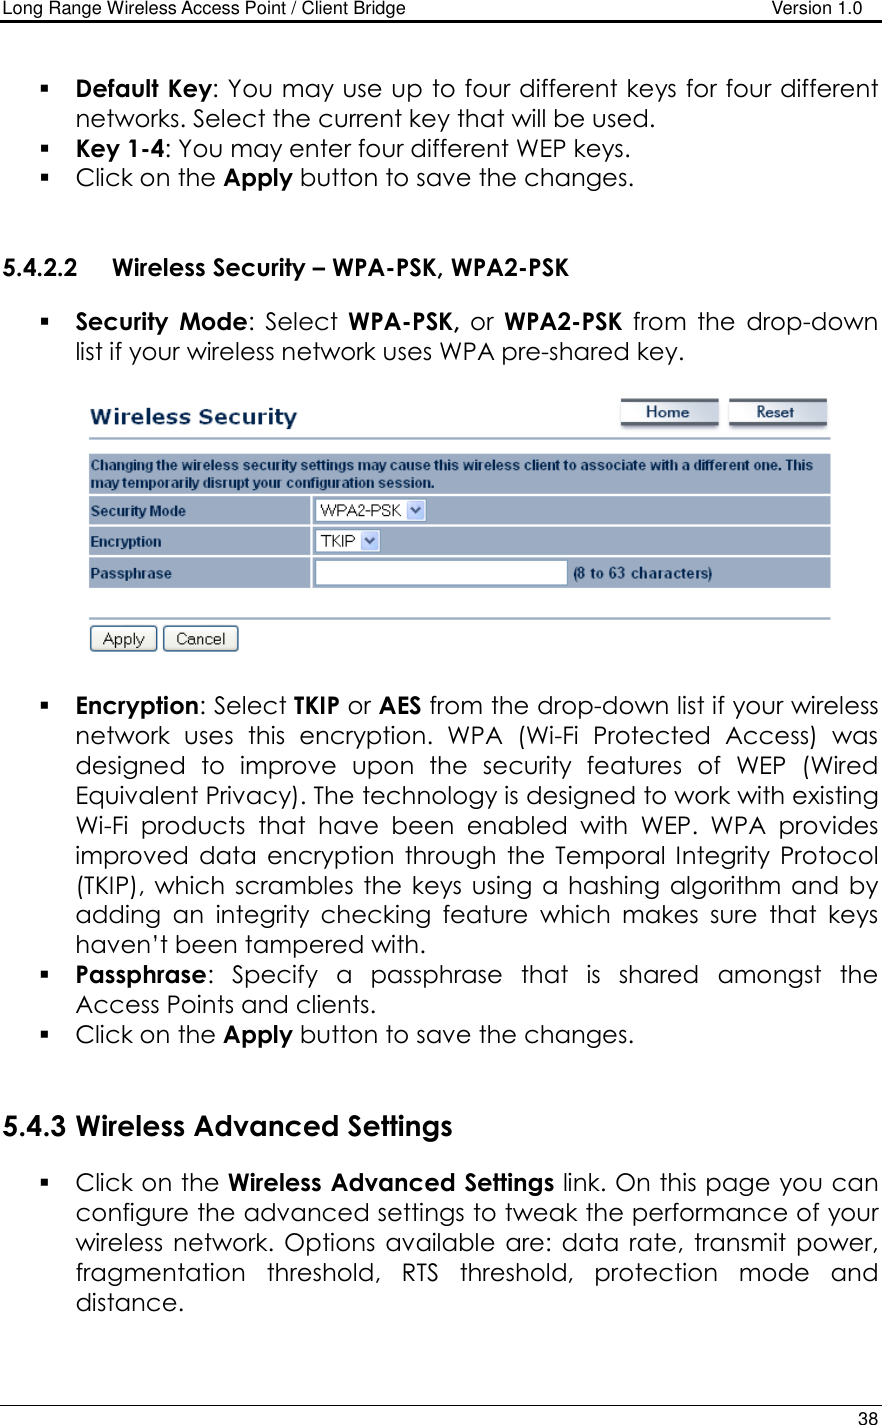 Long Range Wireless Access Point / Client Bridge                                   Version 1.0    38   Default Key: You may use up to four different keys for four different networks. Select the current key that will be used.   Key 1-4: You may enter four different WEP keys.   Click on the Apply button to save the changes.    5.4.2.2 Wireless Security – WPA-PSK, WPA2-PSK  Security Mode:  Select  WPA-PSK,  or  WPA2-PSK  from  the  drop-down list if your wireless network uses WPA pre-shared key.     Encryption: Select TKIP or AES from the drop-down list if your wireless network  uses  this  encryption.  WPA  (Wi-Fi  Protected  Access)  was designed  to  improve  upon  the  security  features  of  WEP  (Wired Equivalent Privacy). The technology is designed to work with existing Wi-Fi  products  that  have  been  enabled  with  WEP.  WPA  provides improved  data  encryption  through  the Temporal  Integrity  Protocol (TKIP),  which  scrambles the  keys using  a hashing  algorithm and by adding  an  integrity  checking  feature  which  makes  sure  that  keys haven’t been tampered with.   Passphrase:  Specify  a  passphrase  that  is  shared  amongst  the Access Points and clients.   Click on the Apply button to save the changes.    5.4.3 Wireless Advanced Settings  Click on the Wireless Advanced Settings link. On this page you can configure the advanced settings to tweak the performance of your wireless  network.  Options  available are: data rate,  transmit  power, fragmentation  threshold,  RTS  threshold,  protection  mode  and distance.   